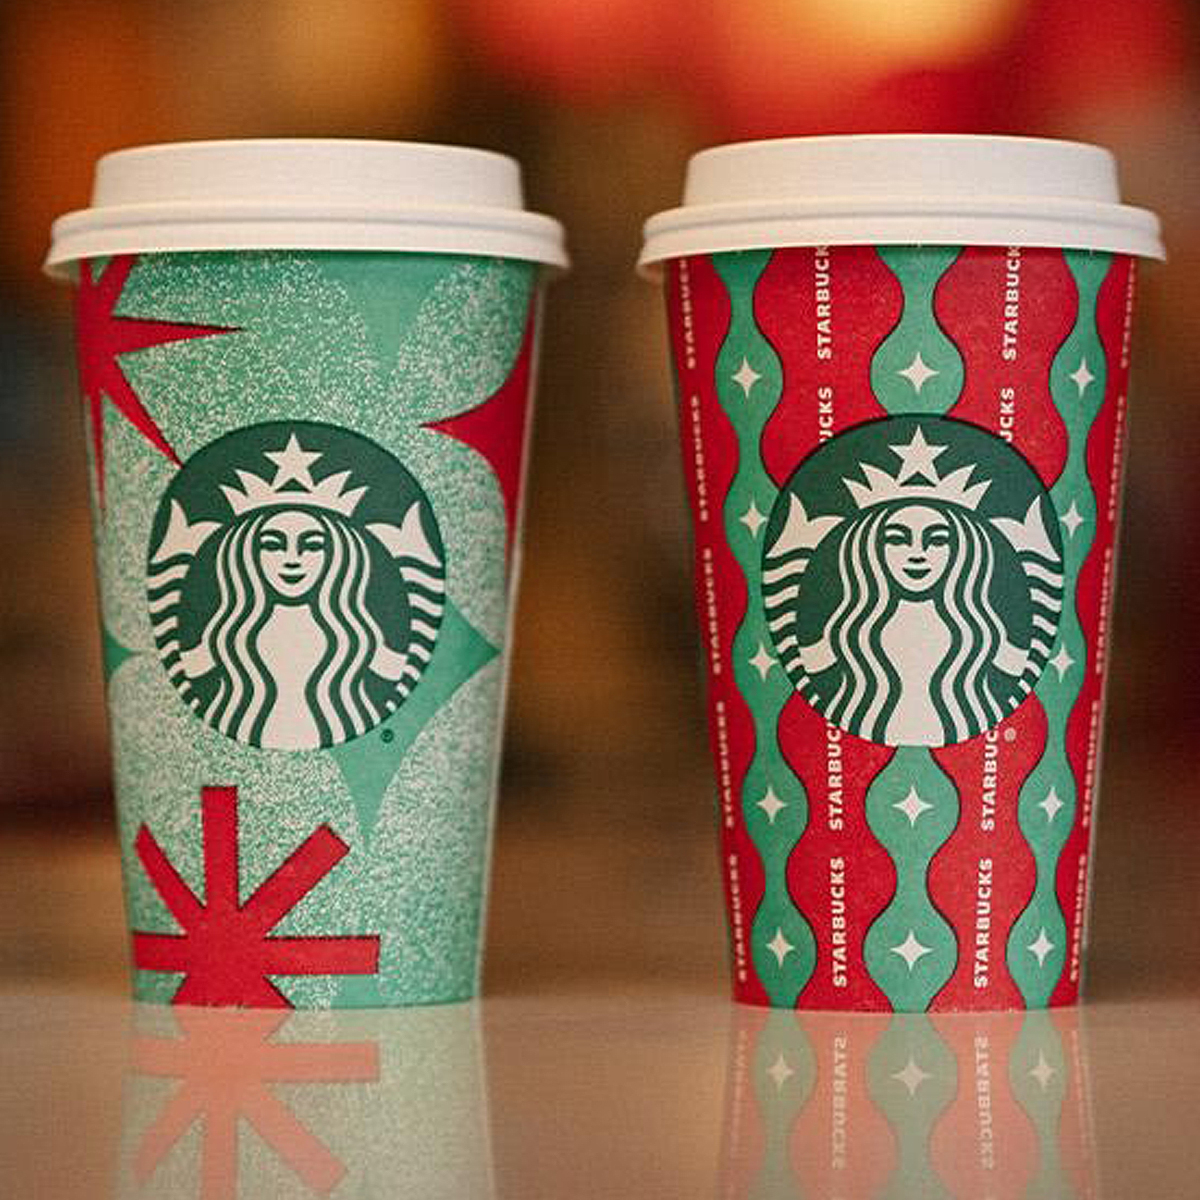 https://akns-images.eonline.com/eol_images/Entire_Site/2022103/rs_1200x1200-221103070113-1200-Starbucks-Holiday-Cups-2022-LT-11322-Courtesy-Starbucks.jpg?fit=around%7C1080:1080&output-quality=90&crop=1080:1080;center,top